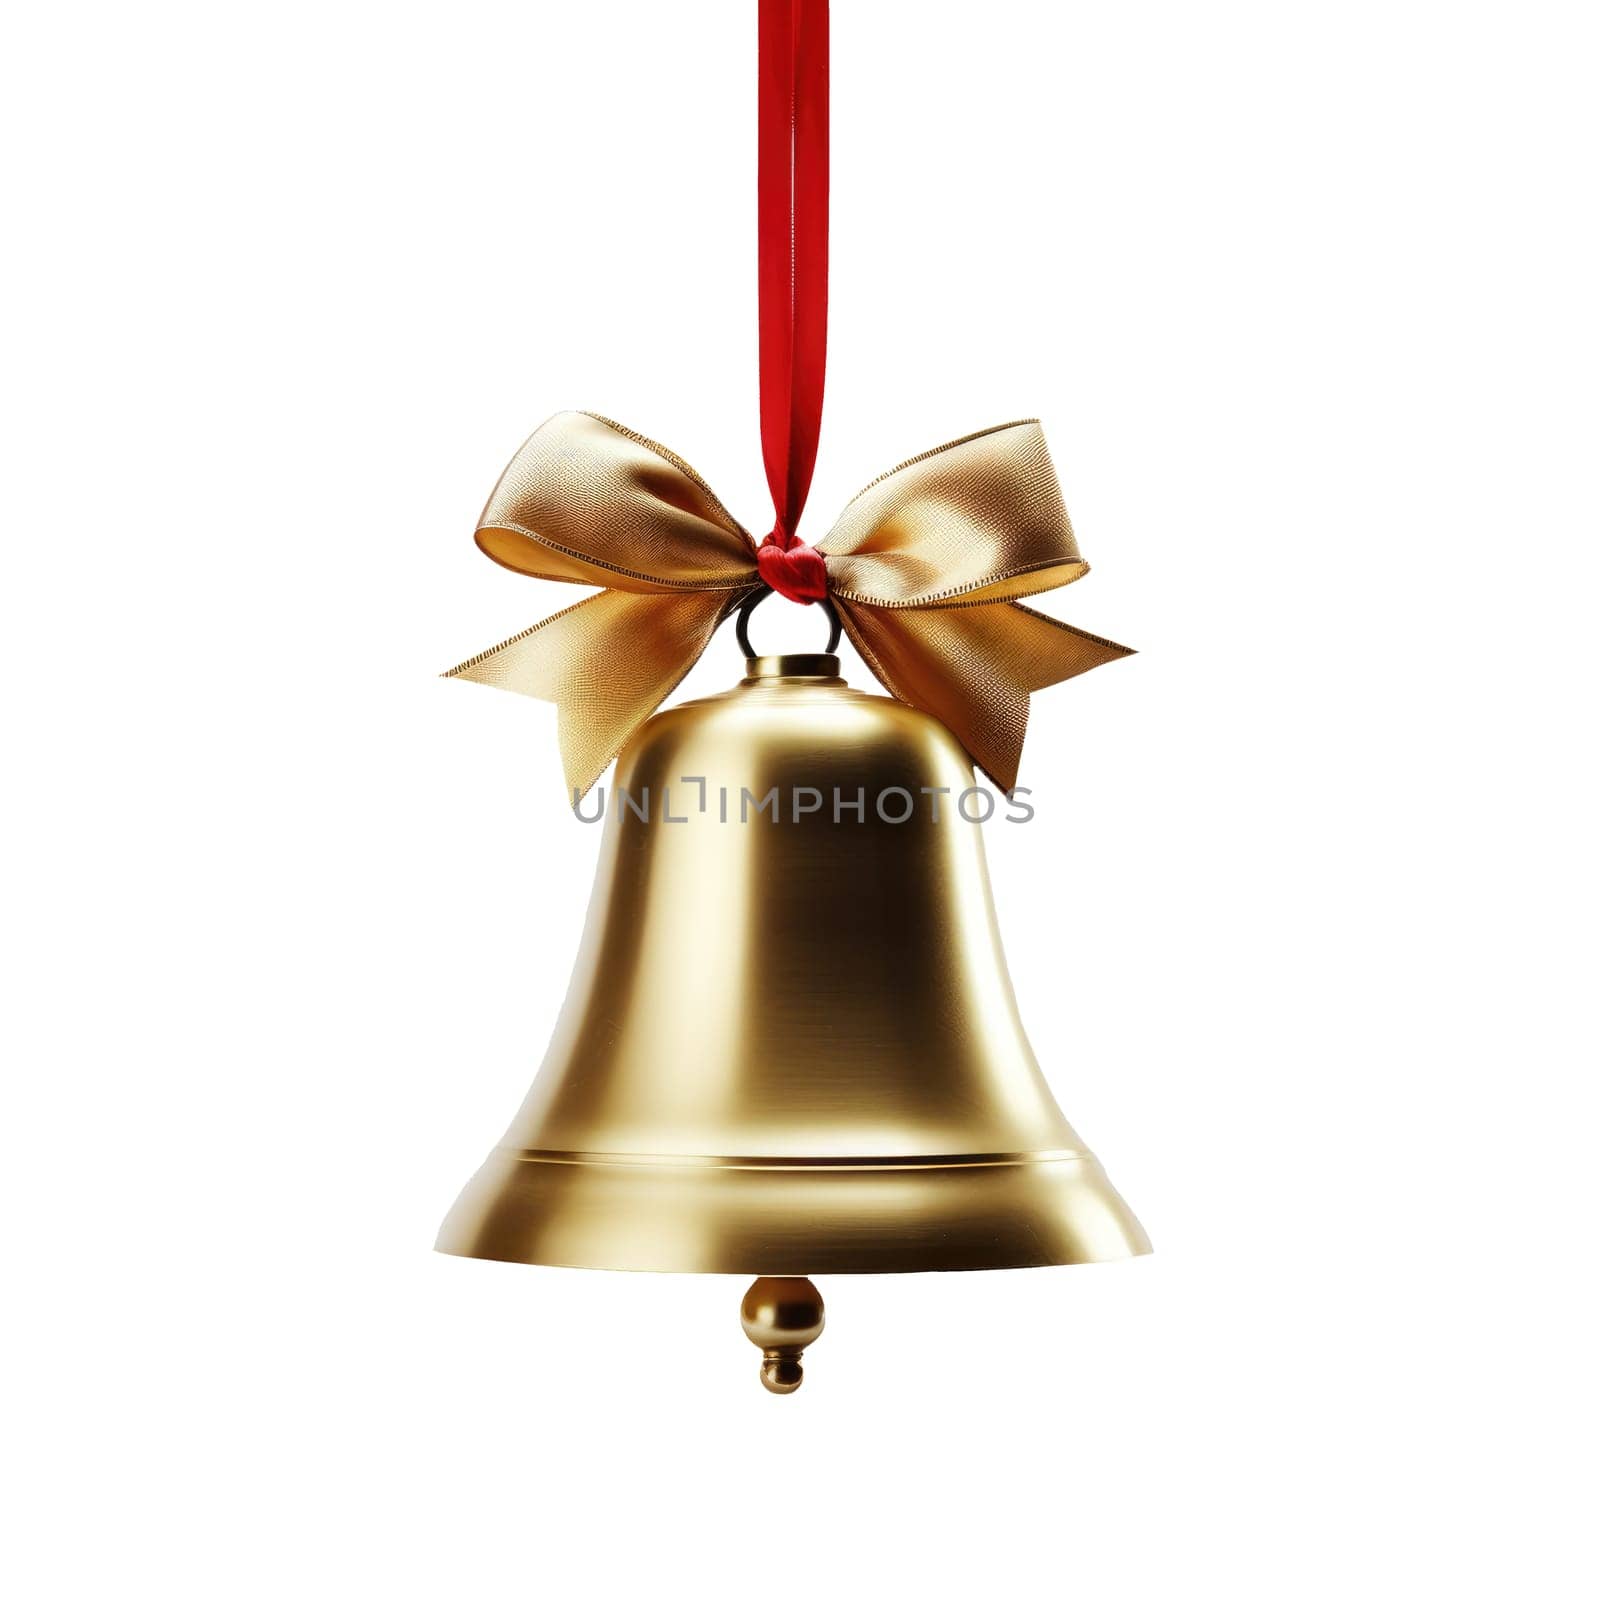 Golden Christmas bell isolated on white background by natali_brill